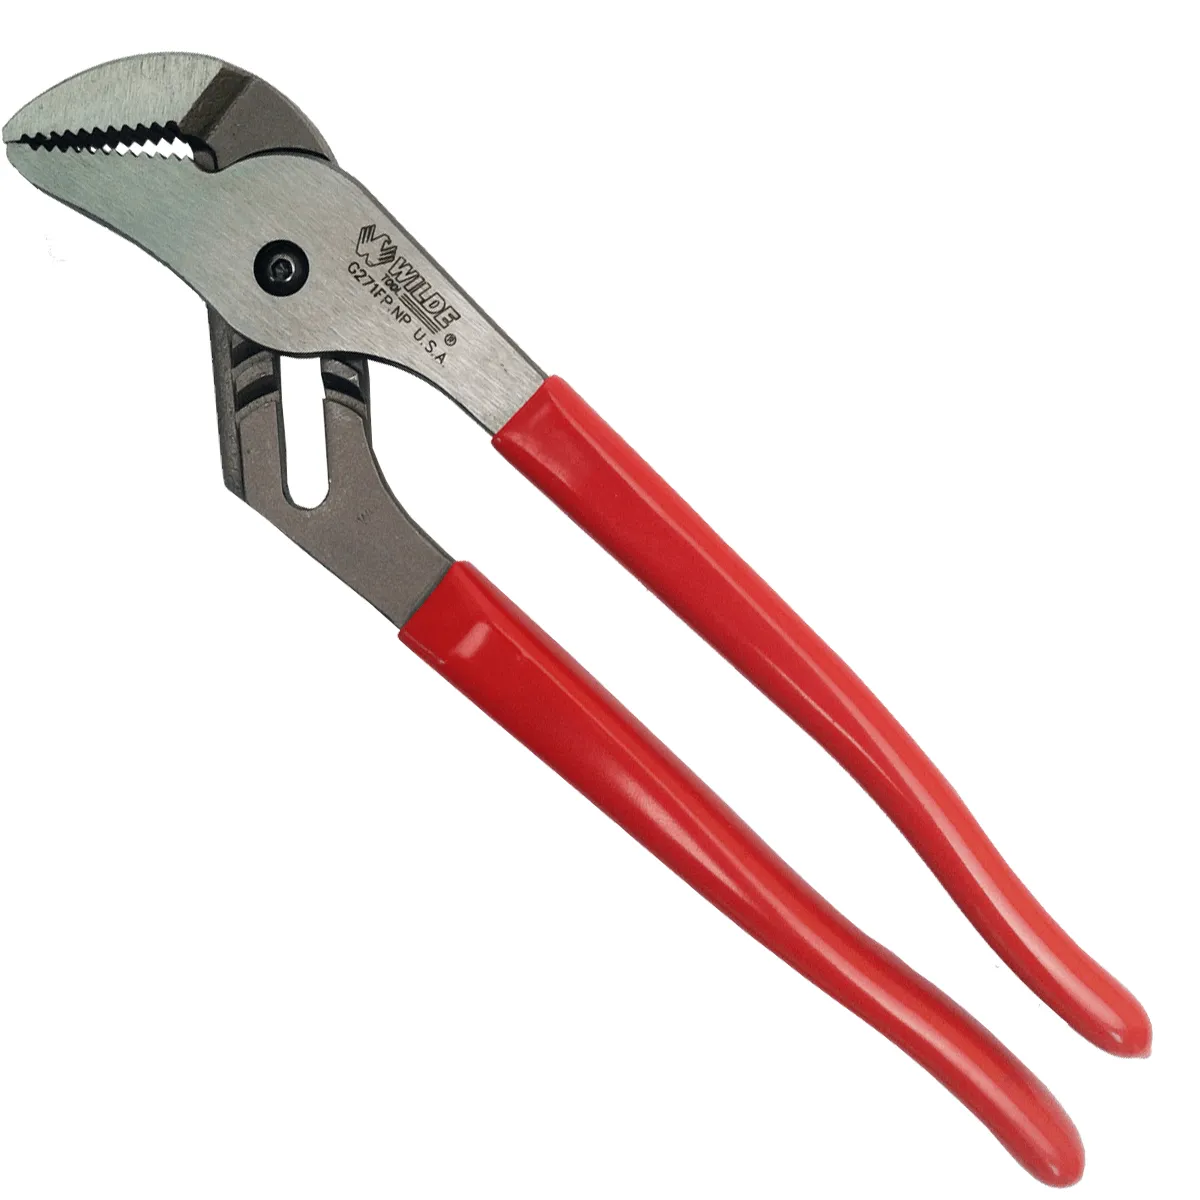 Wilde 8" Slip Joint Pliers (G263P.NP/BB)